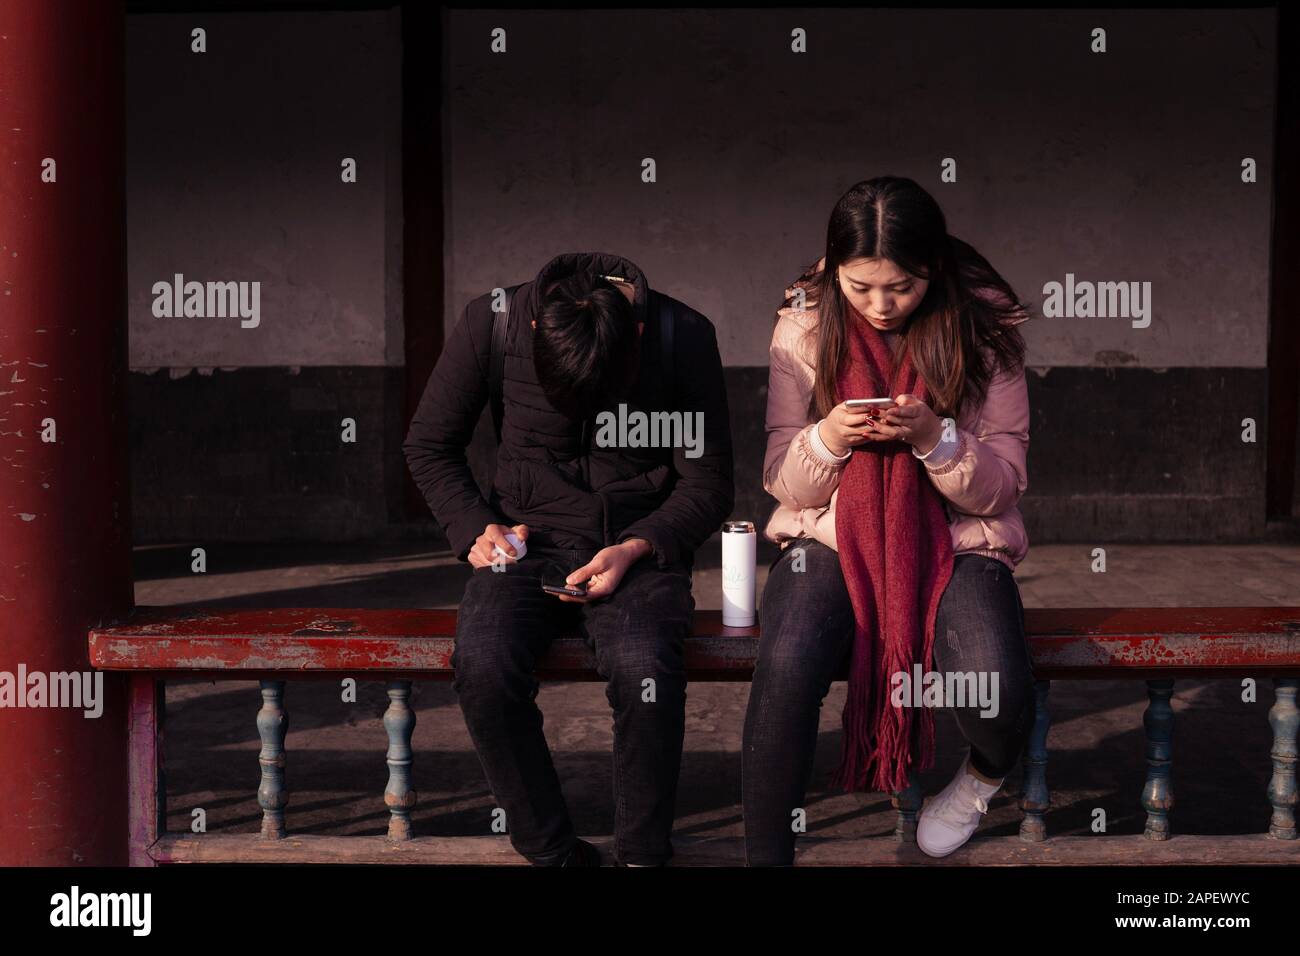 Millennials and technology / technology disrupting relationships. A young couple use phones to text, message and browse social media while seating Stock Photo